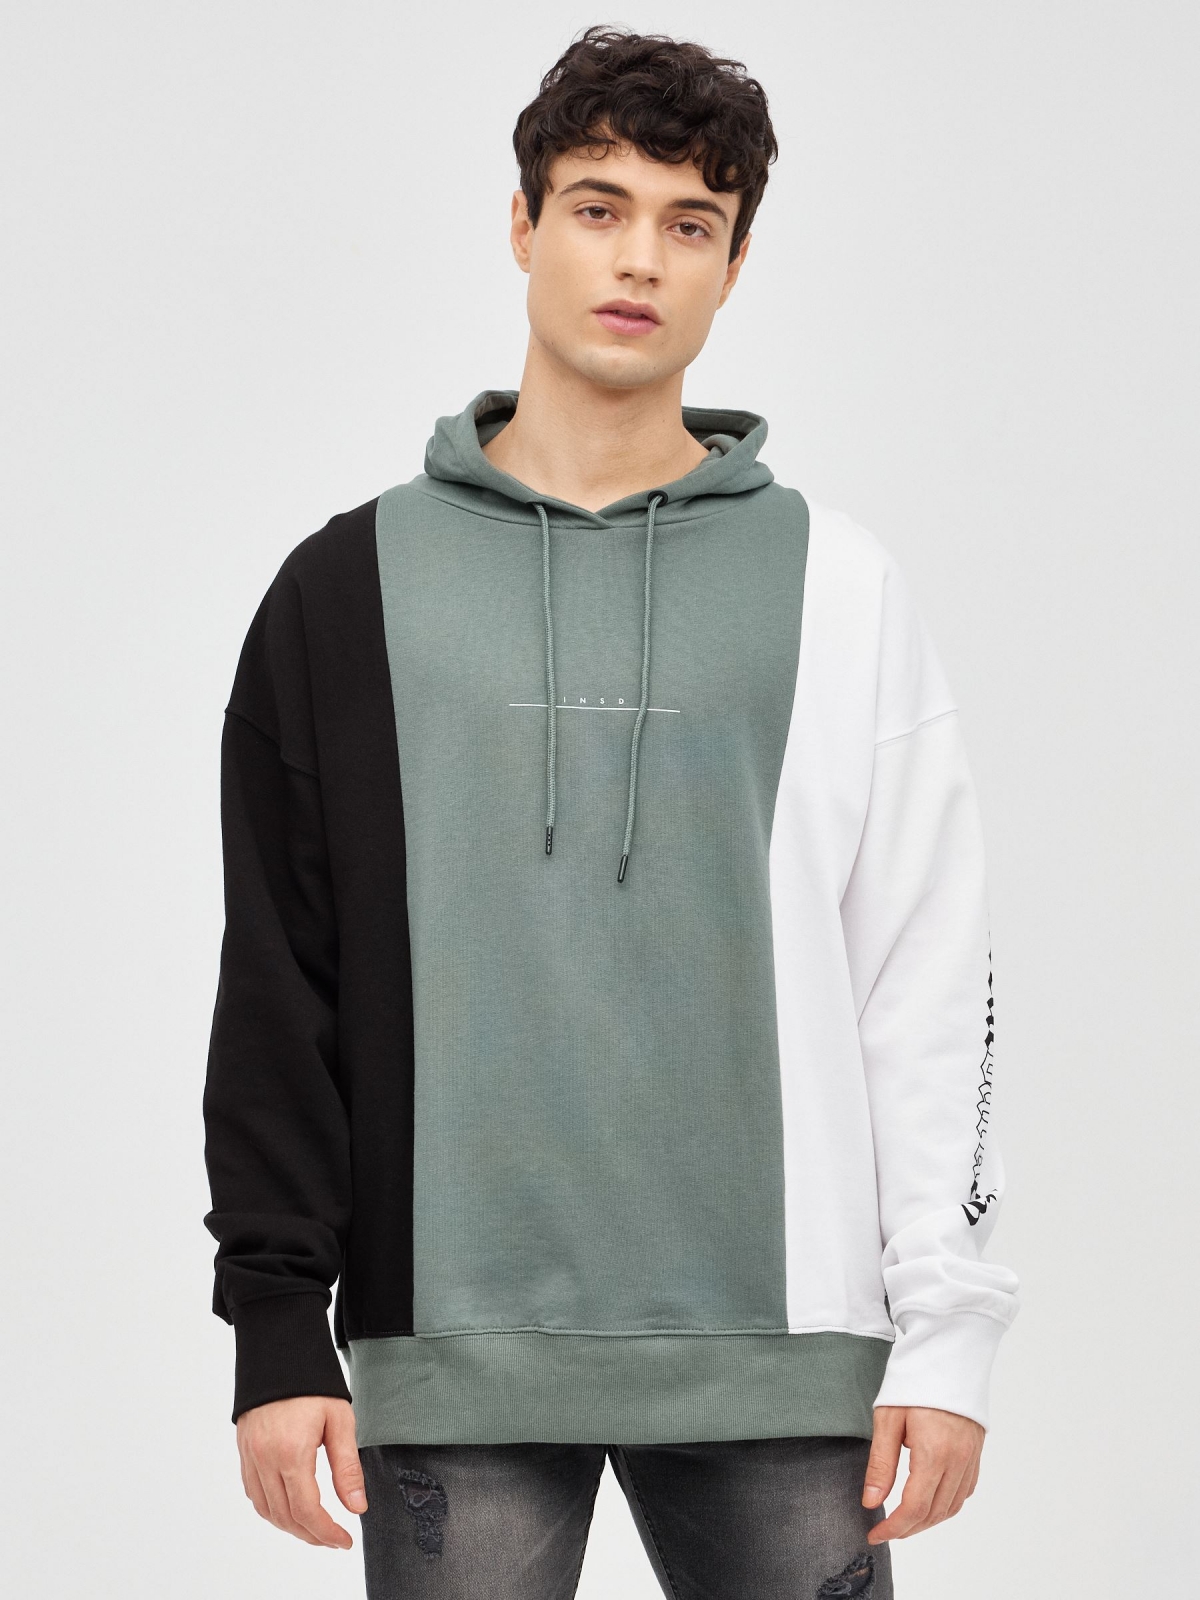 Tricolor sweatshirt with text greyish green middle front view